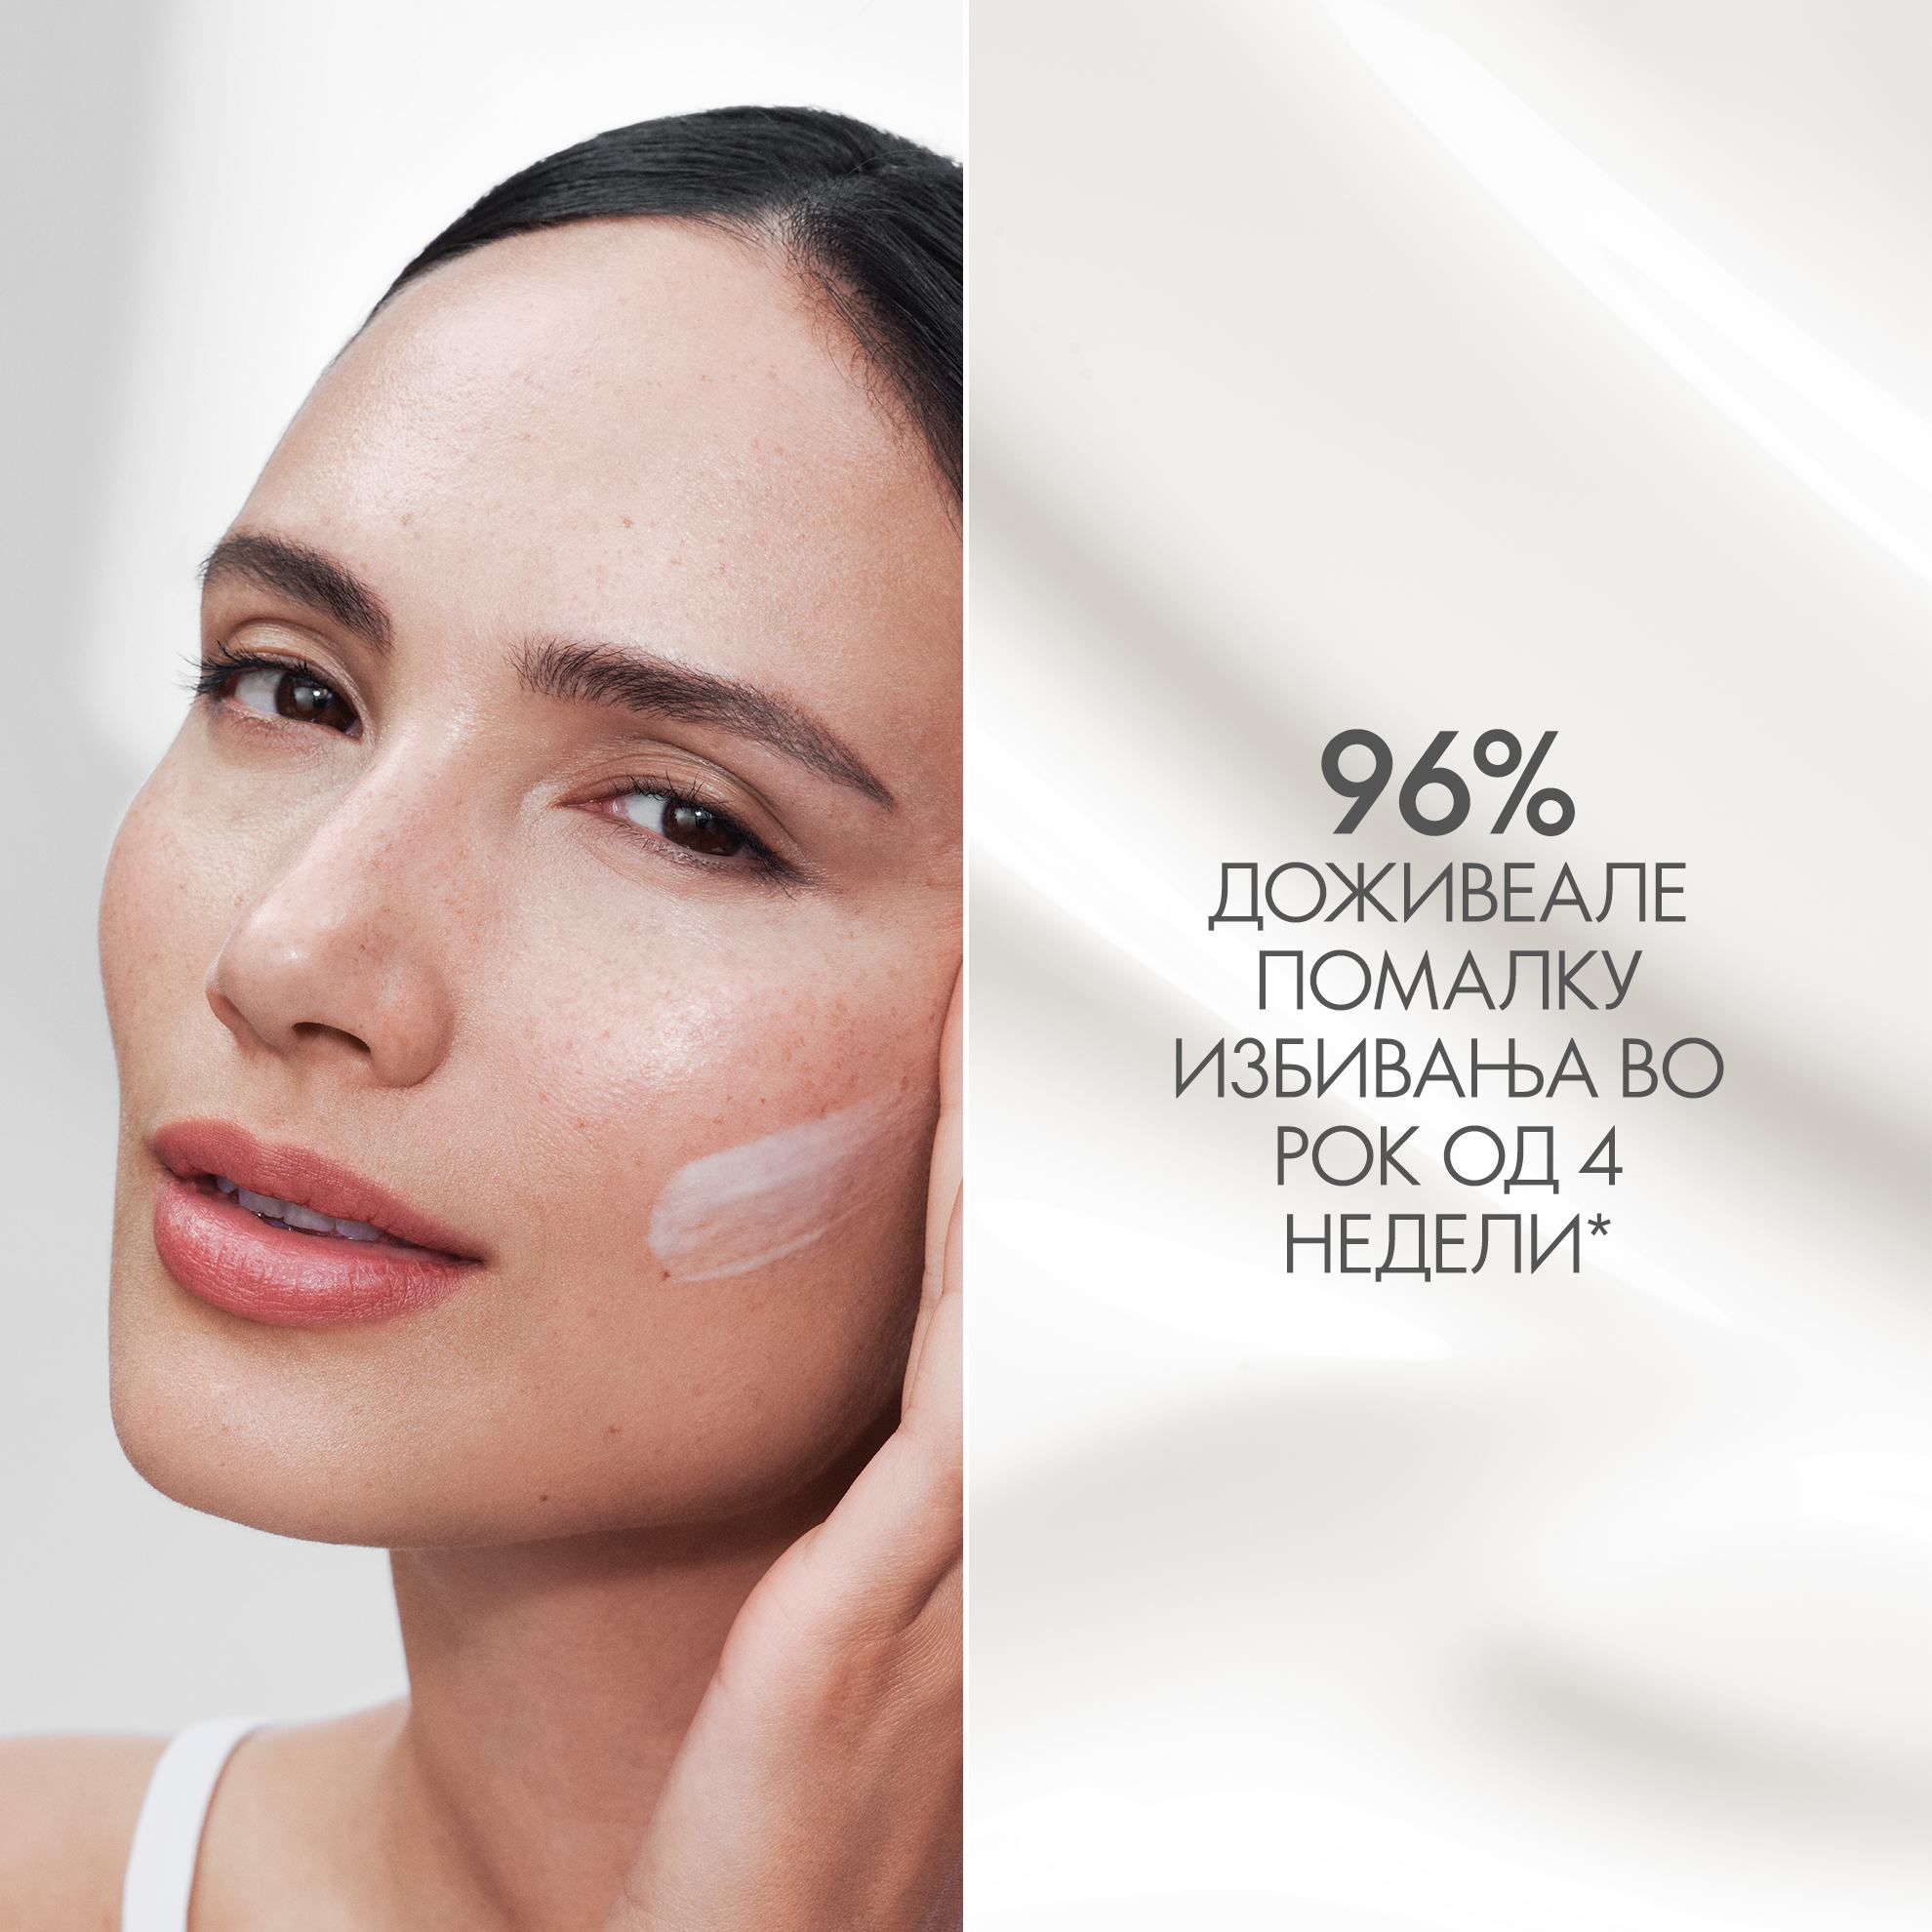 https://media-cdn.oriflame.com/productImage?externalMediaId=product-management-media%2fProducts%2f41039%2fMK%2f41039_2.png&id=17583802&version=2